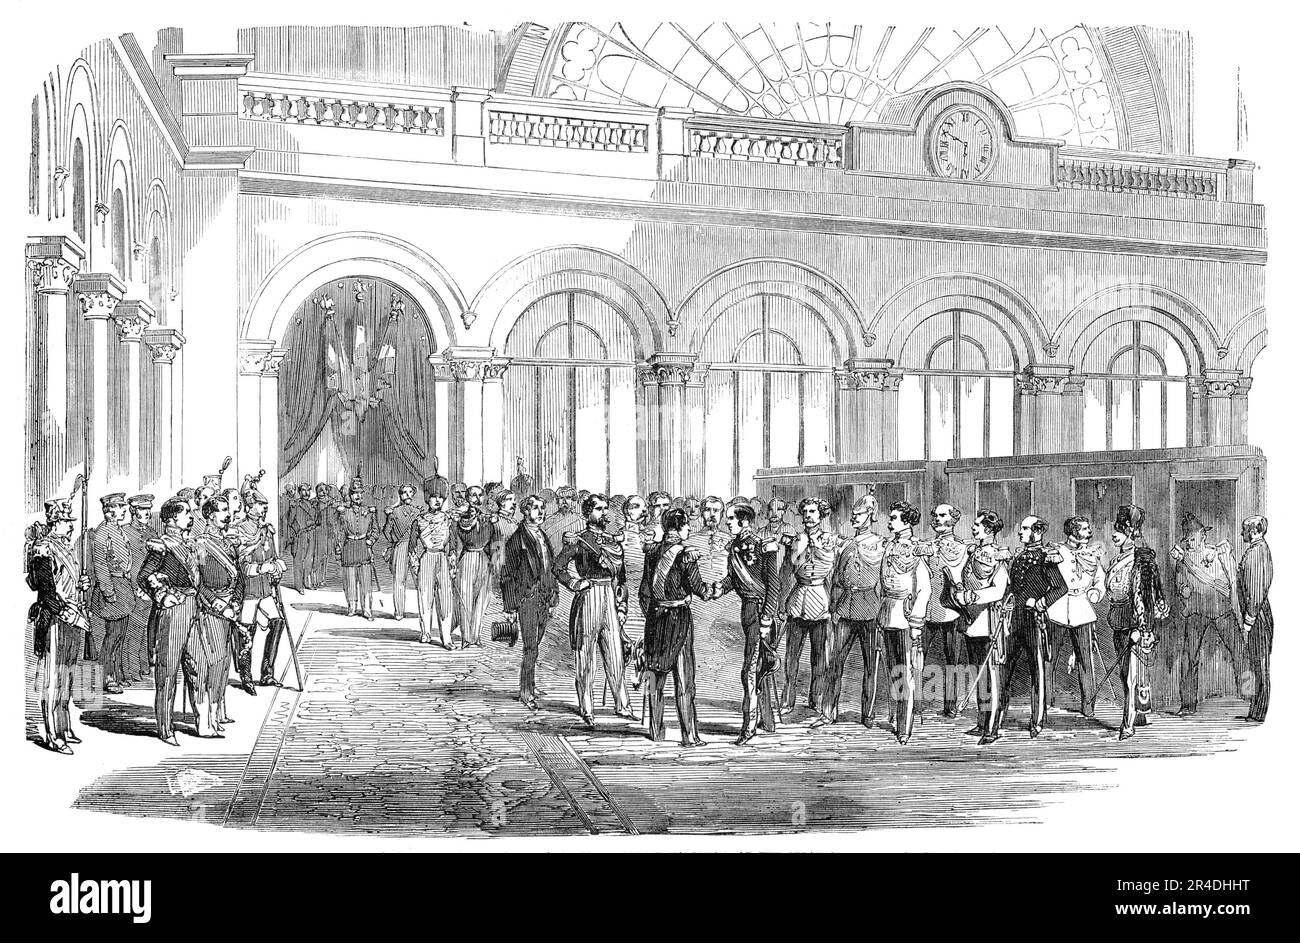 Reception of the Archduke Maximilian of Austria by Prince Napoleon, at the Strasbourg Railway Terminus, at Paris, 1856. 'The Archduke Ferdinand Maximilian, brother of the Emperor of Austria, arrived in Paris...by the Strasbourg Railway. Prince Napoleon received his Imperial Highness at the terminus, and accompanied him to St. Cloud. With the Archduke returned Baron de Hubner, the Austrian Ambassador; the Duke de Tarente, one of the Chamberlains of the Emperor; and the Duke de Cadore, Orderly Officer to the Emperor, who will be attached to his Imperial Highness during his stay in France'. From Stock Photo